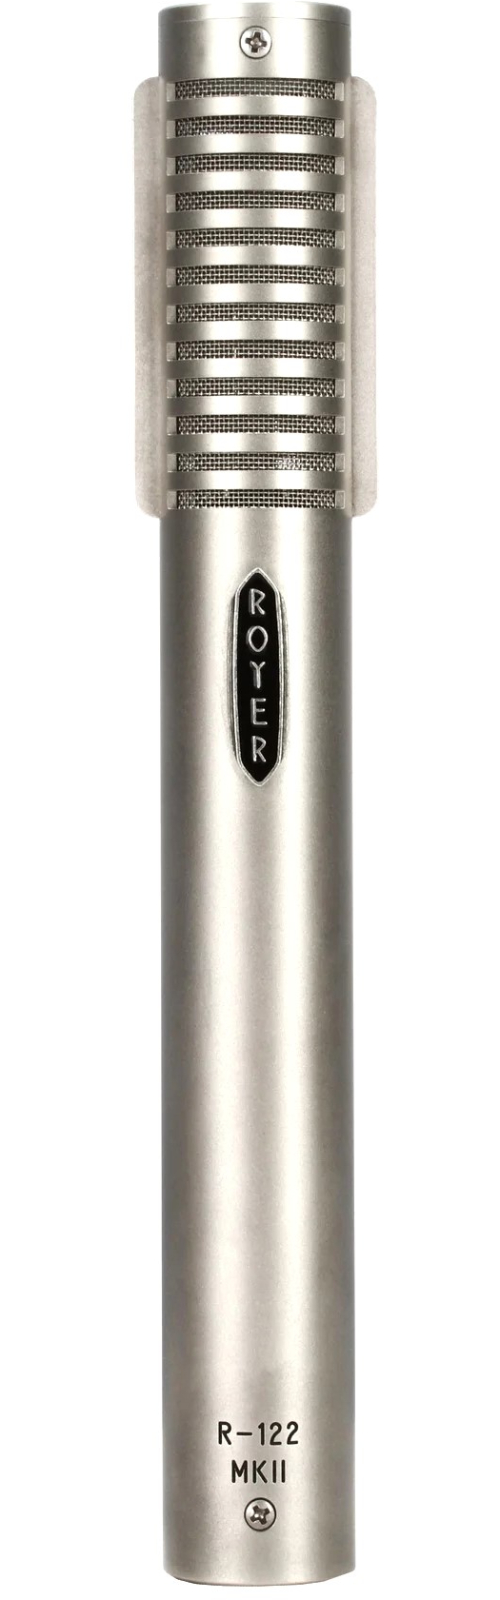 ROYER LABS R-122 MKII